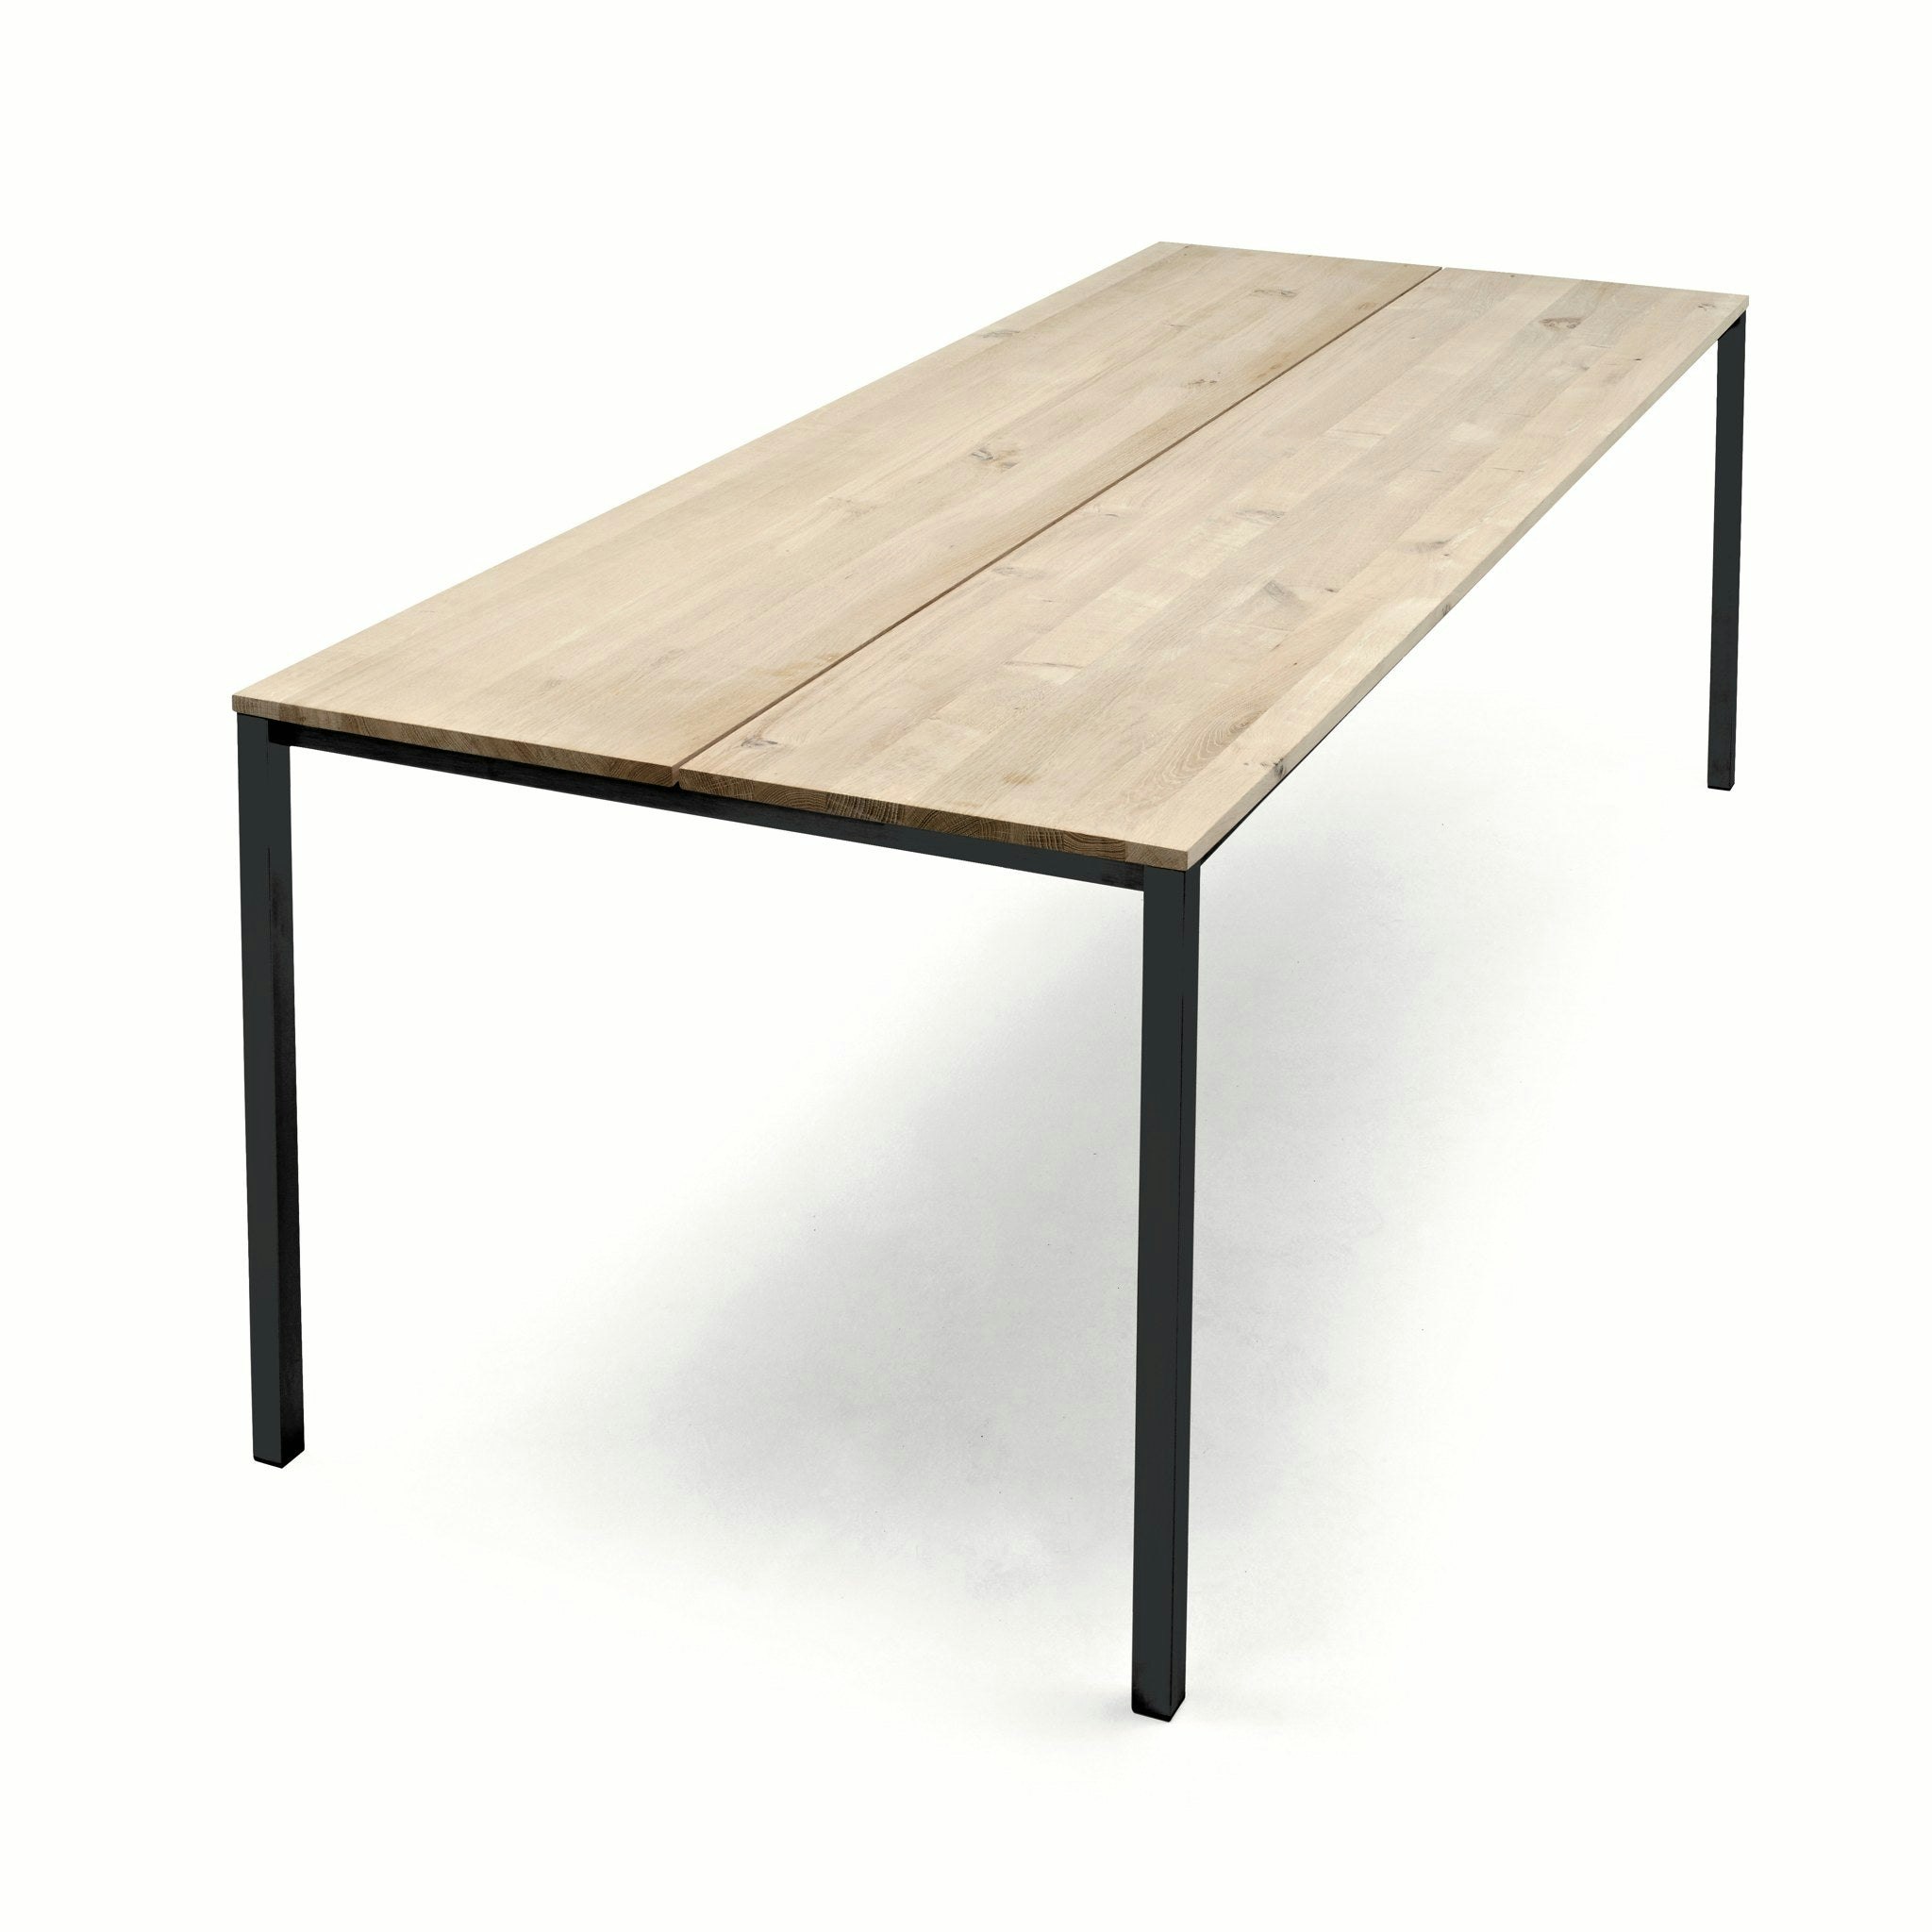 Less Is More Table by Jacob Plejdrup for DK3